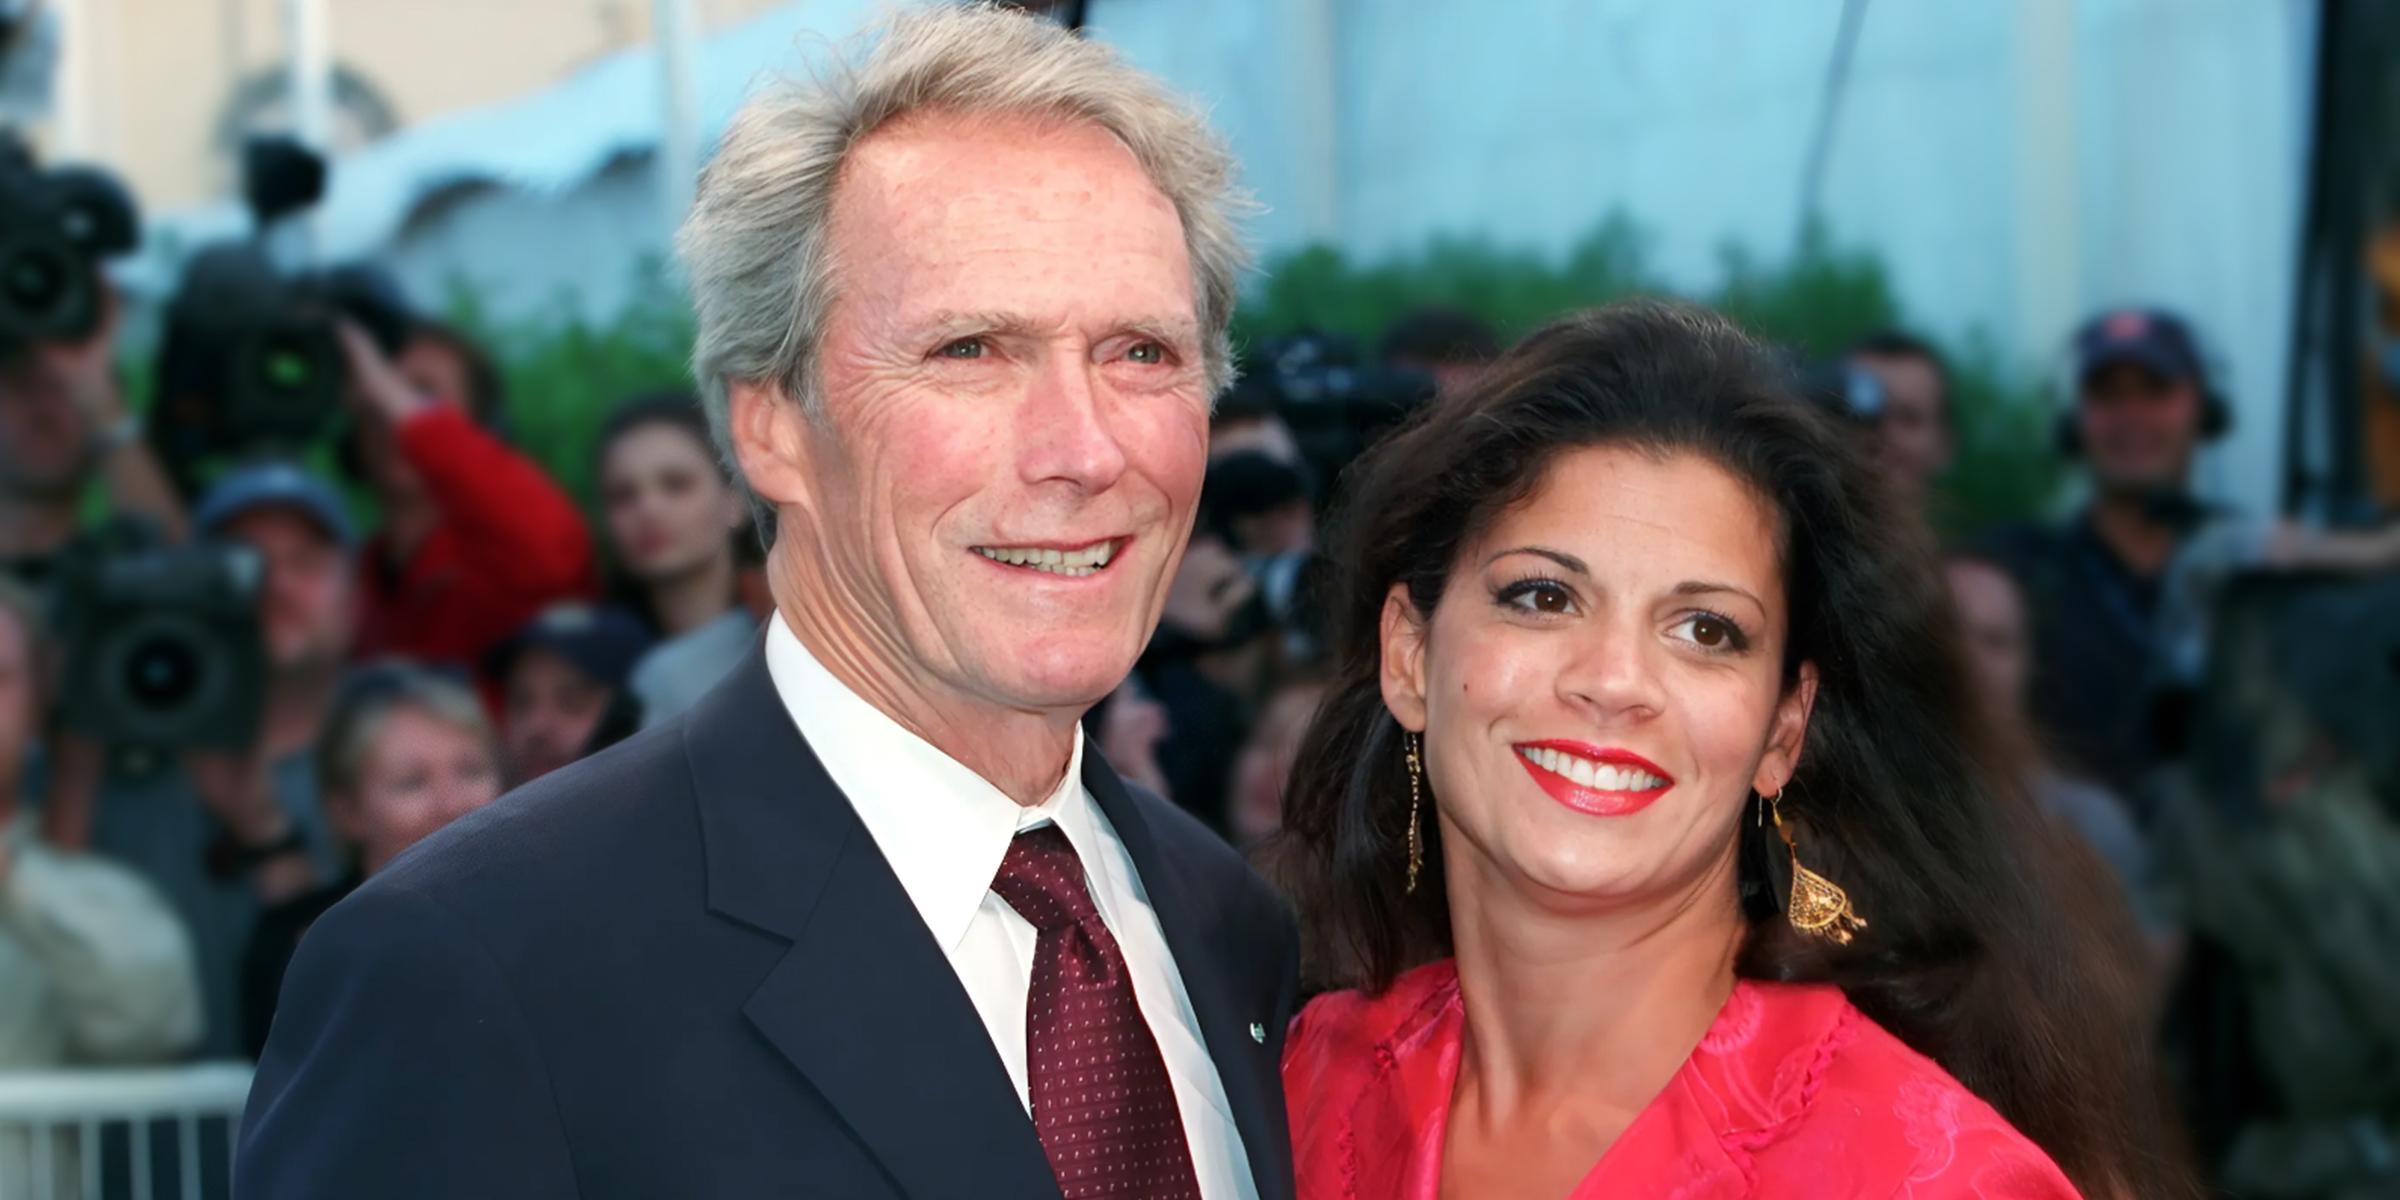 Clint Eastwood and Dina Ruiz | Source: Getty Images